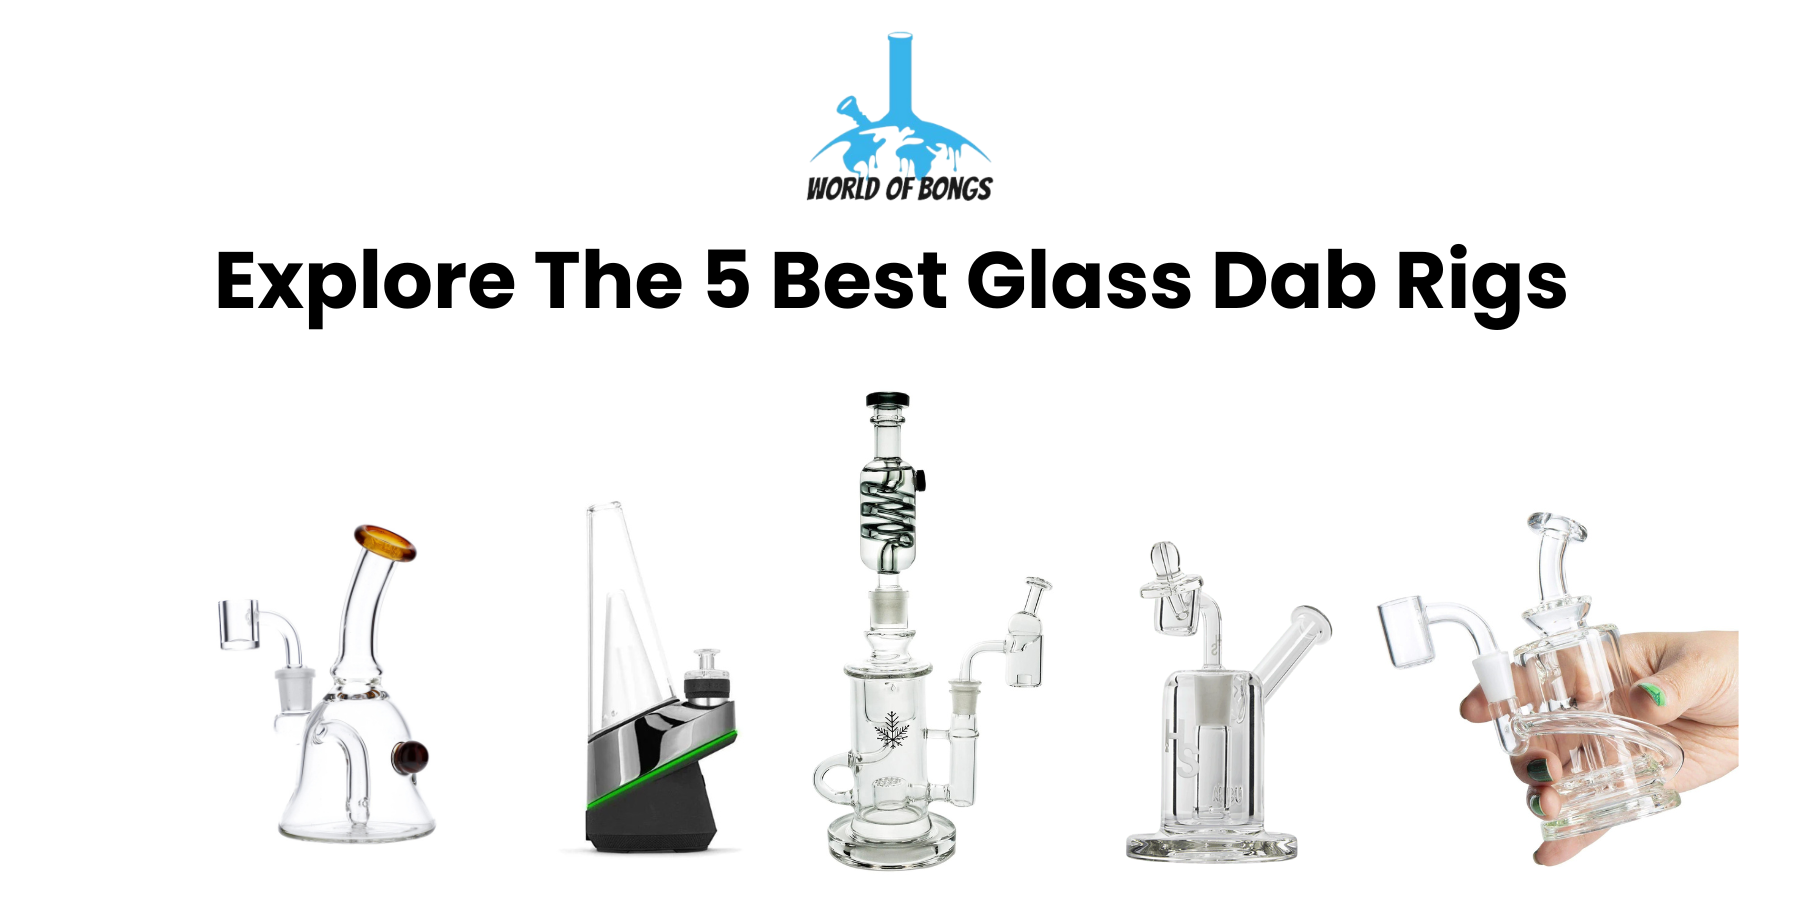 Dab Rig vs Bong - What Are The Differences?